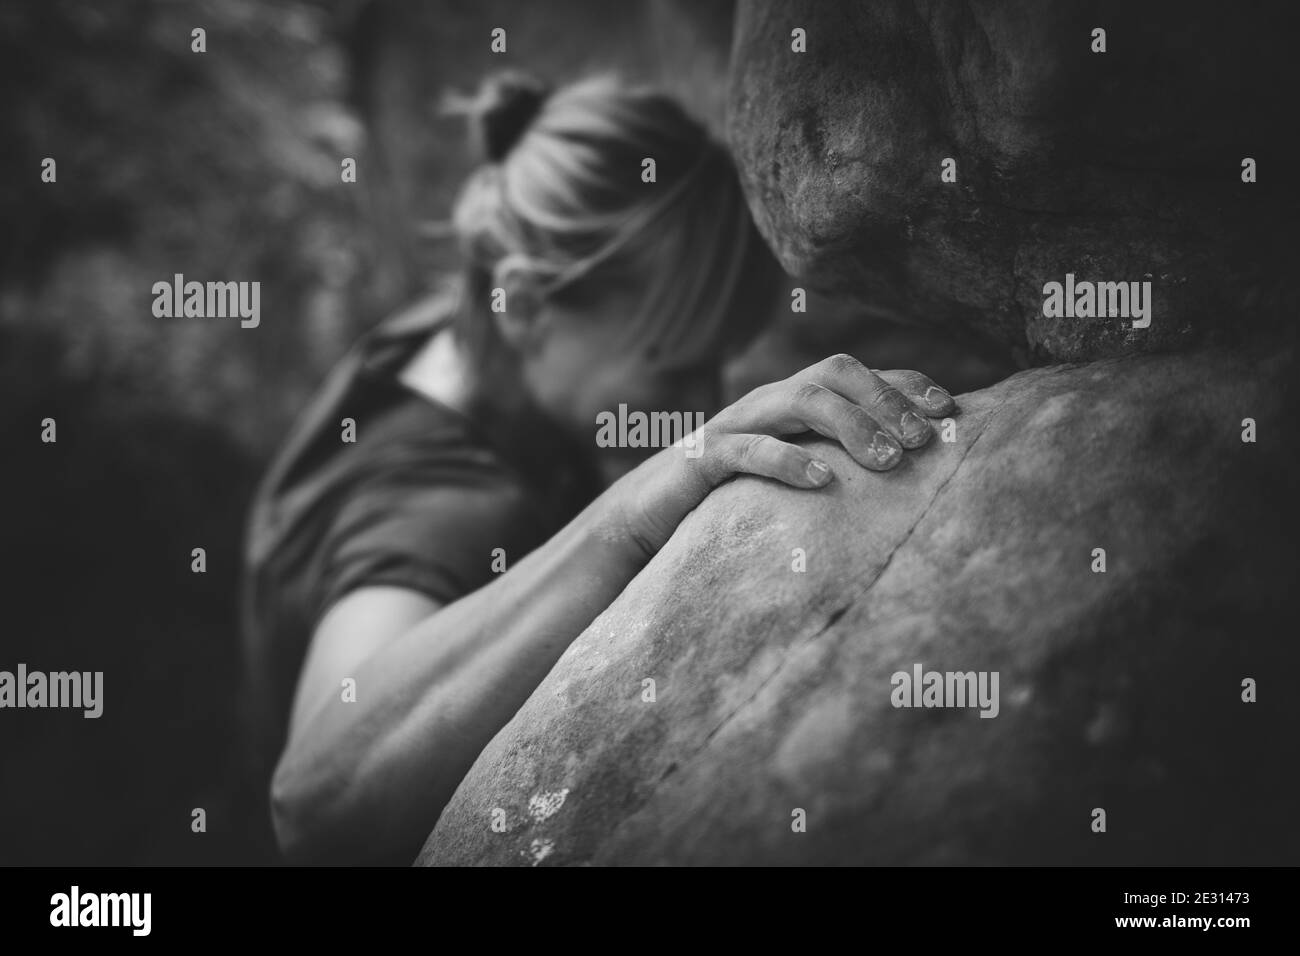 A female rock climber bouldering on sandstone rocks in Fontainebleau, France, black and white. Stock Photo